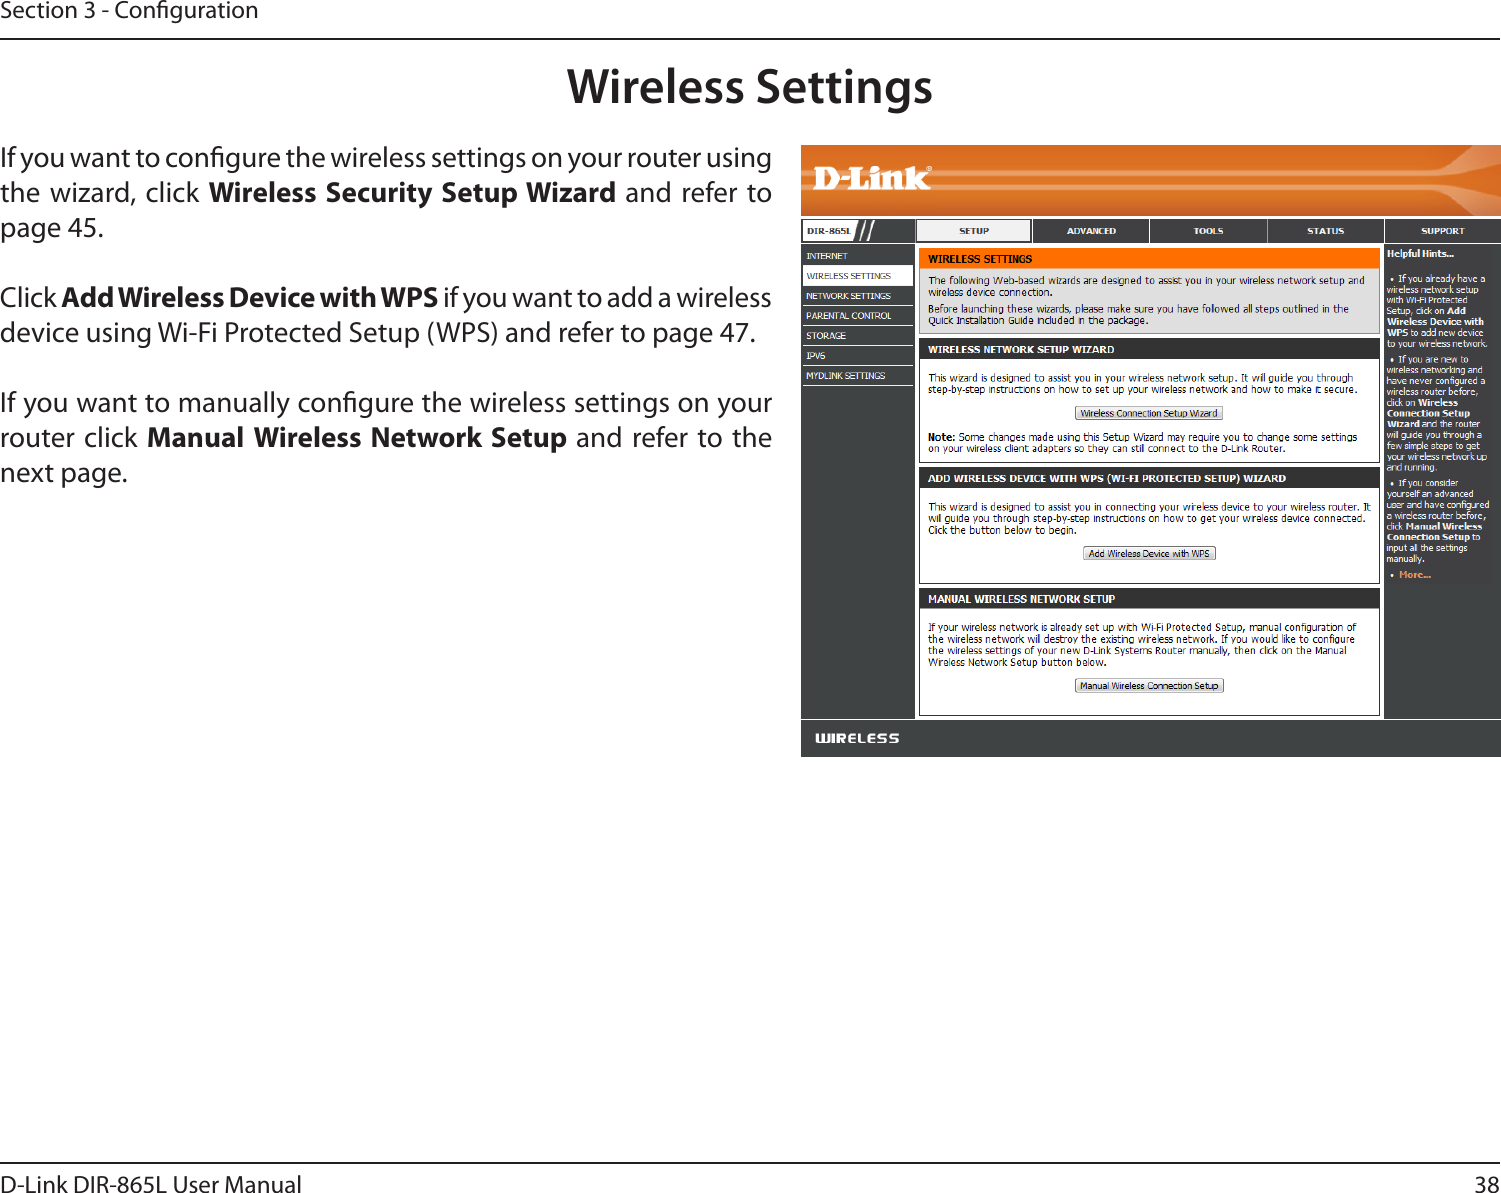 38D-Link DIR-865L User ManualSection 3 - CongurationWireless SettingsIf you want to congure the wireless settings on your router using the wizard, click Wireless Security Setup Wizard and refer to page 45.Click Add Wireless Device with WPS if you want to add a wireless device using Wi-Fi Protected Setup (WPS) and refer to page 47.If you want to manually congure the wireless settings on your router click Manual Wireless Network Setup and refer to the next page.